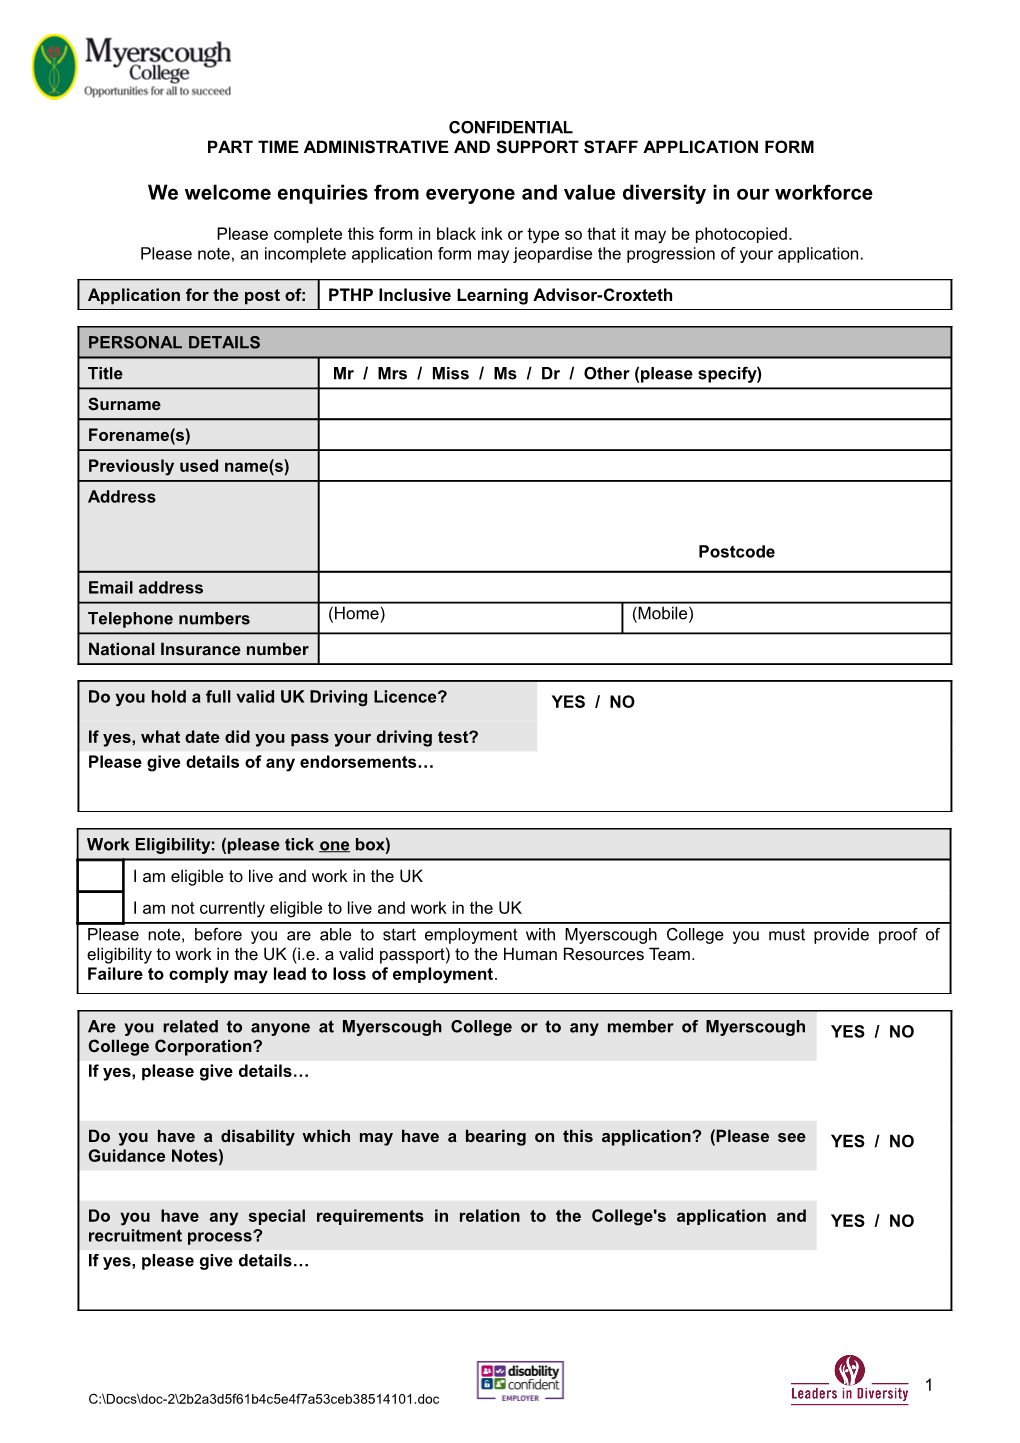 Part Time Administrative and Support Staff Application Form